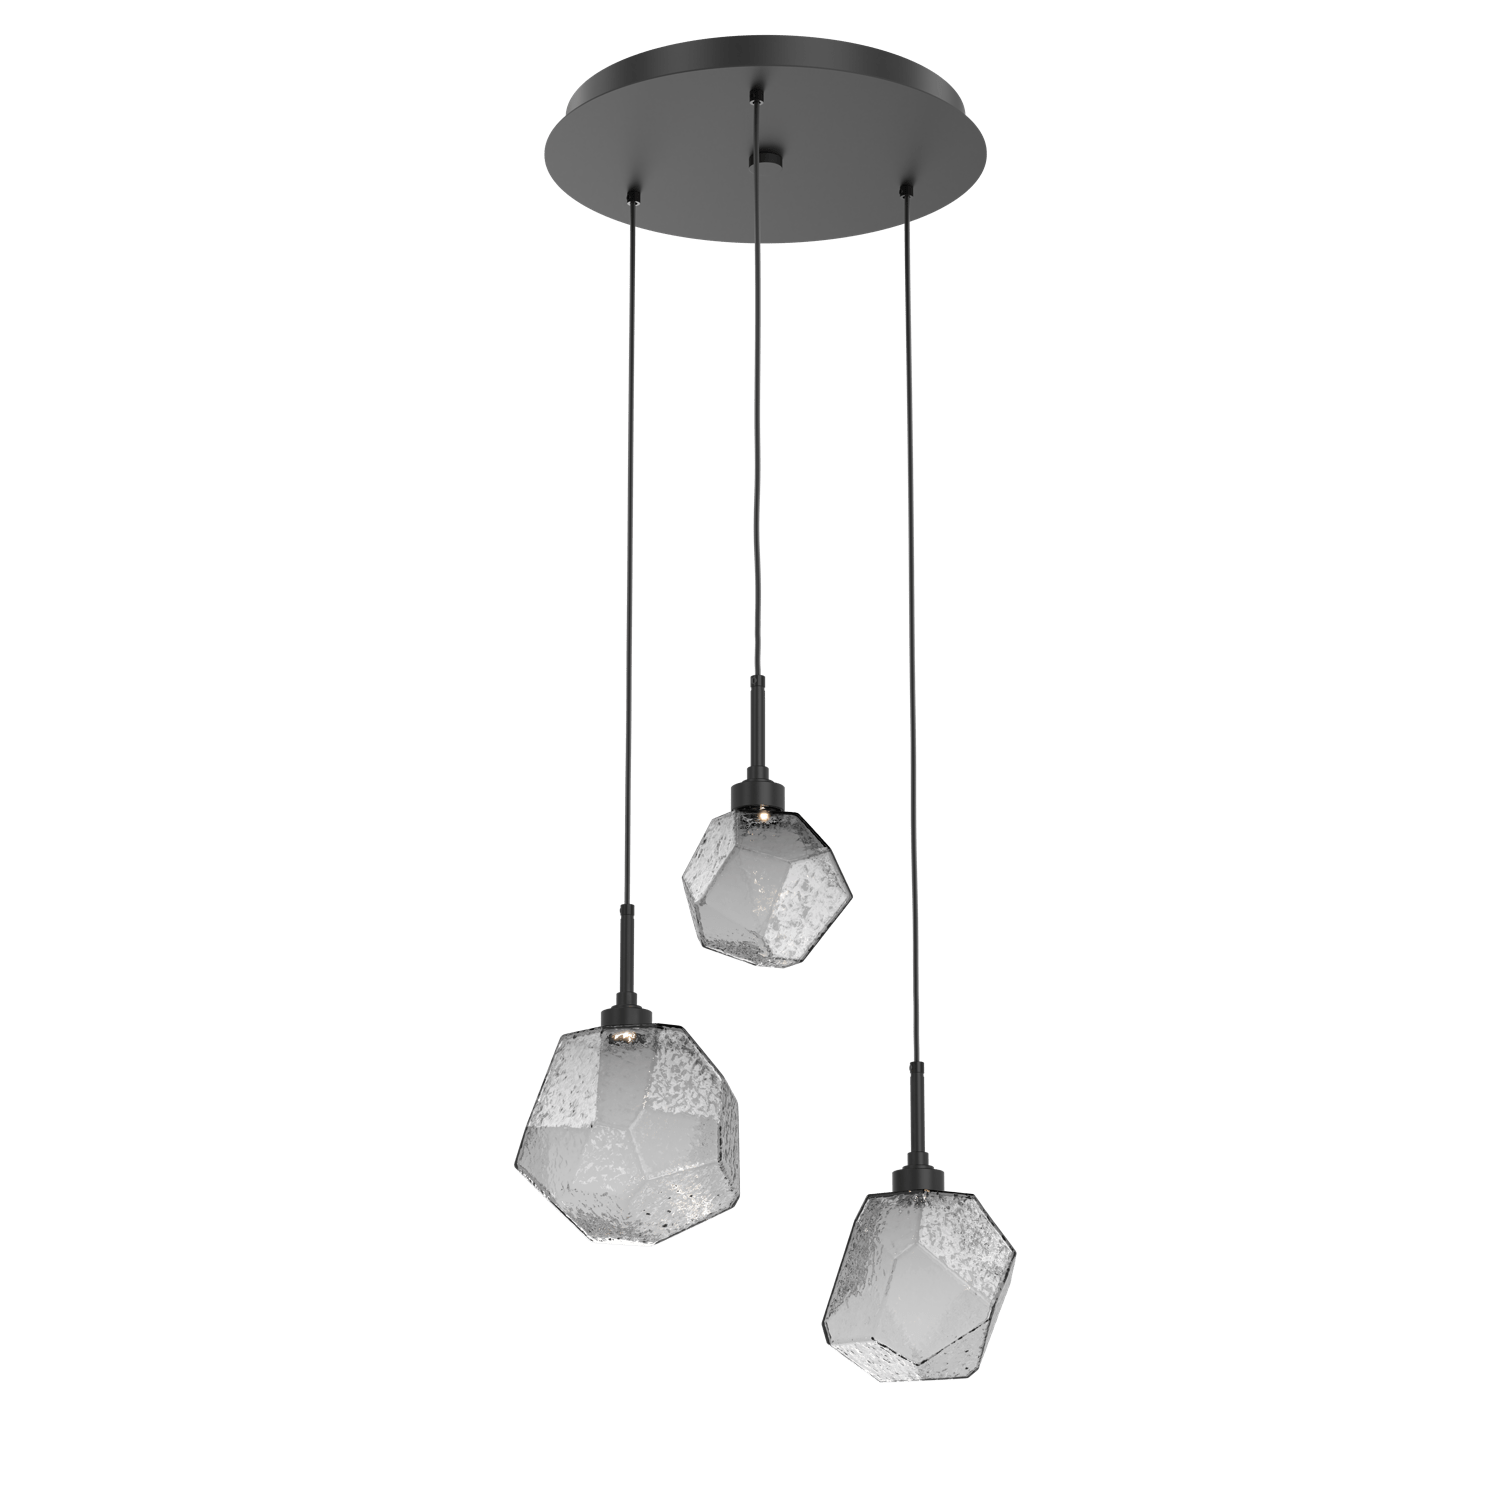 CHB0039-03-MB-S-Hammerton-Studio-Gem-3-light-round-pendant-chandelier-with-matte-black-finish-and-smoke-blown-glass-shades-and-LED-lamping